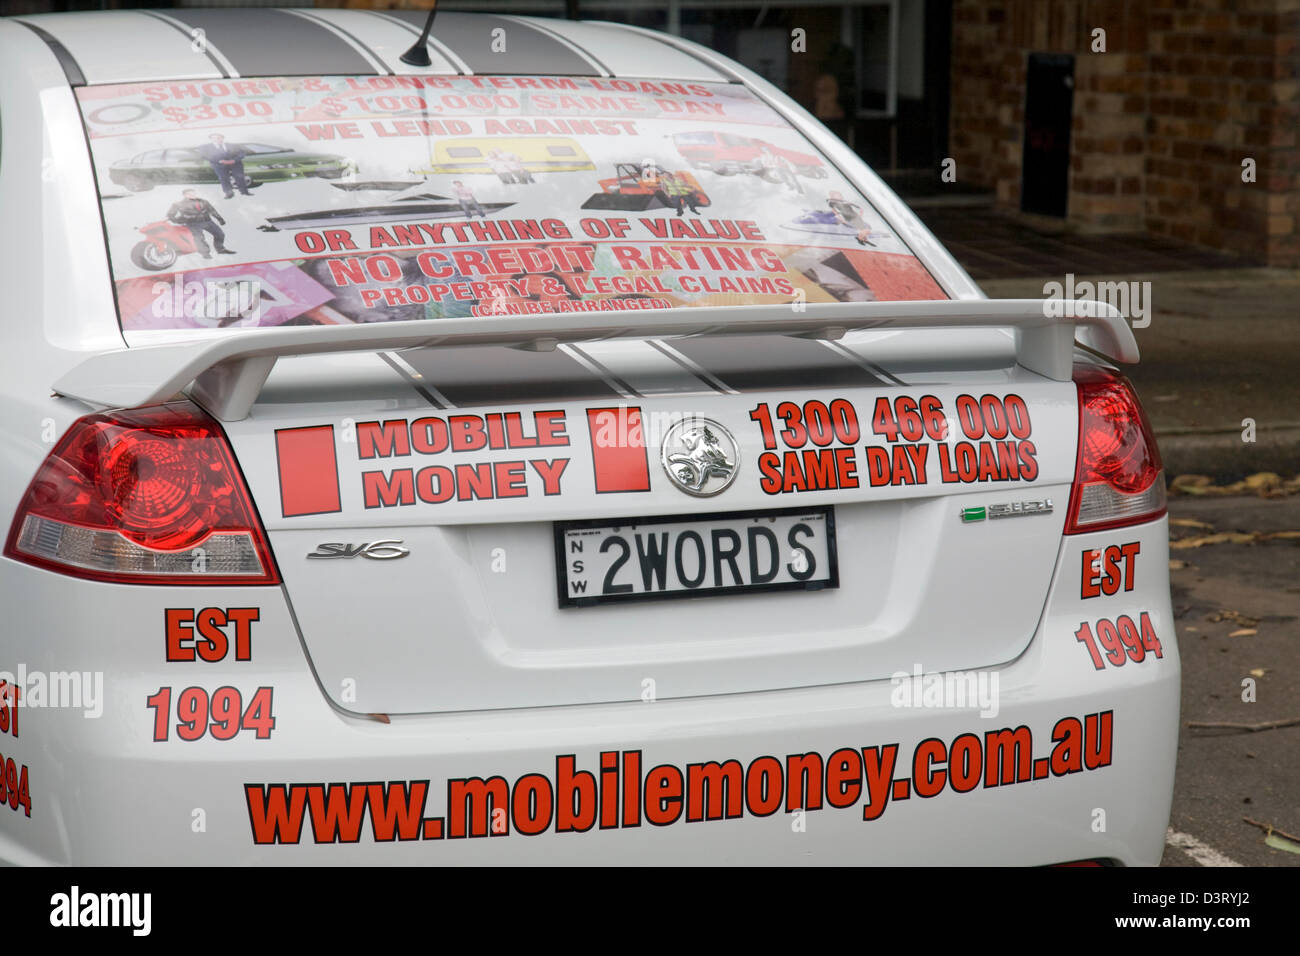 holden car advertising financial products ,sydney Stock Photo